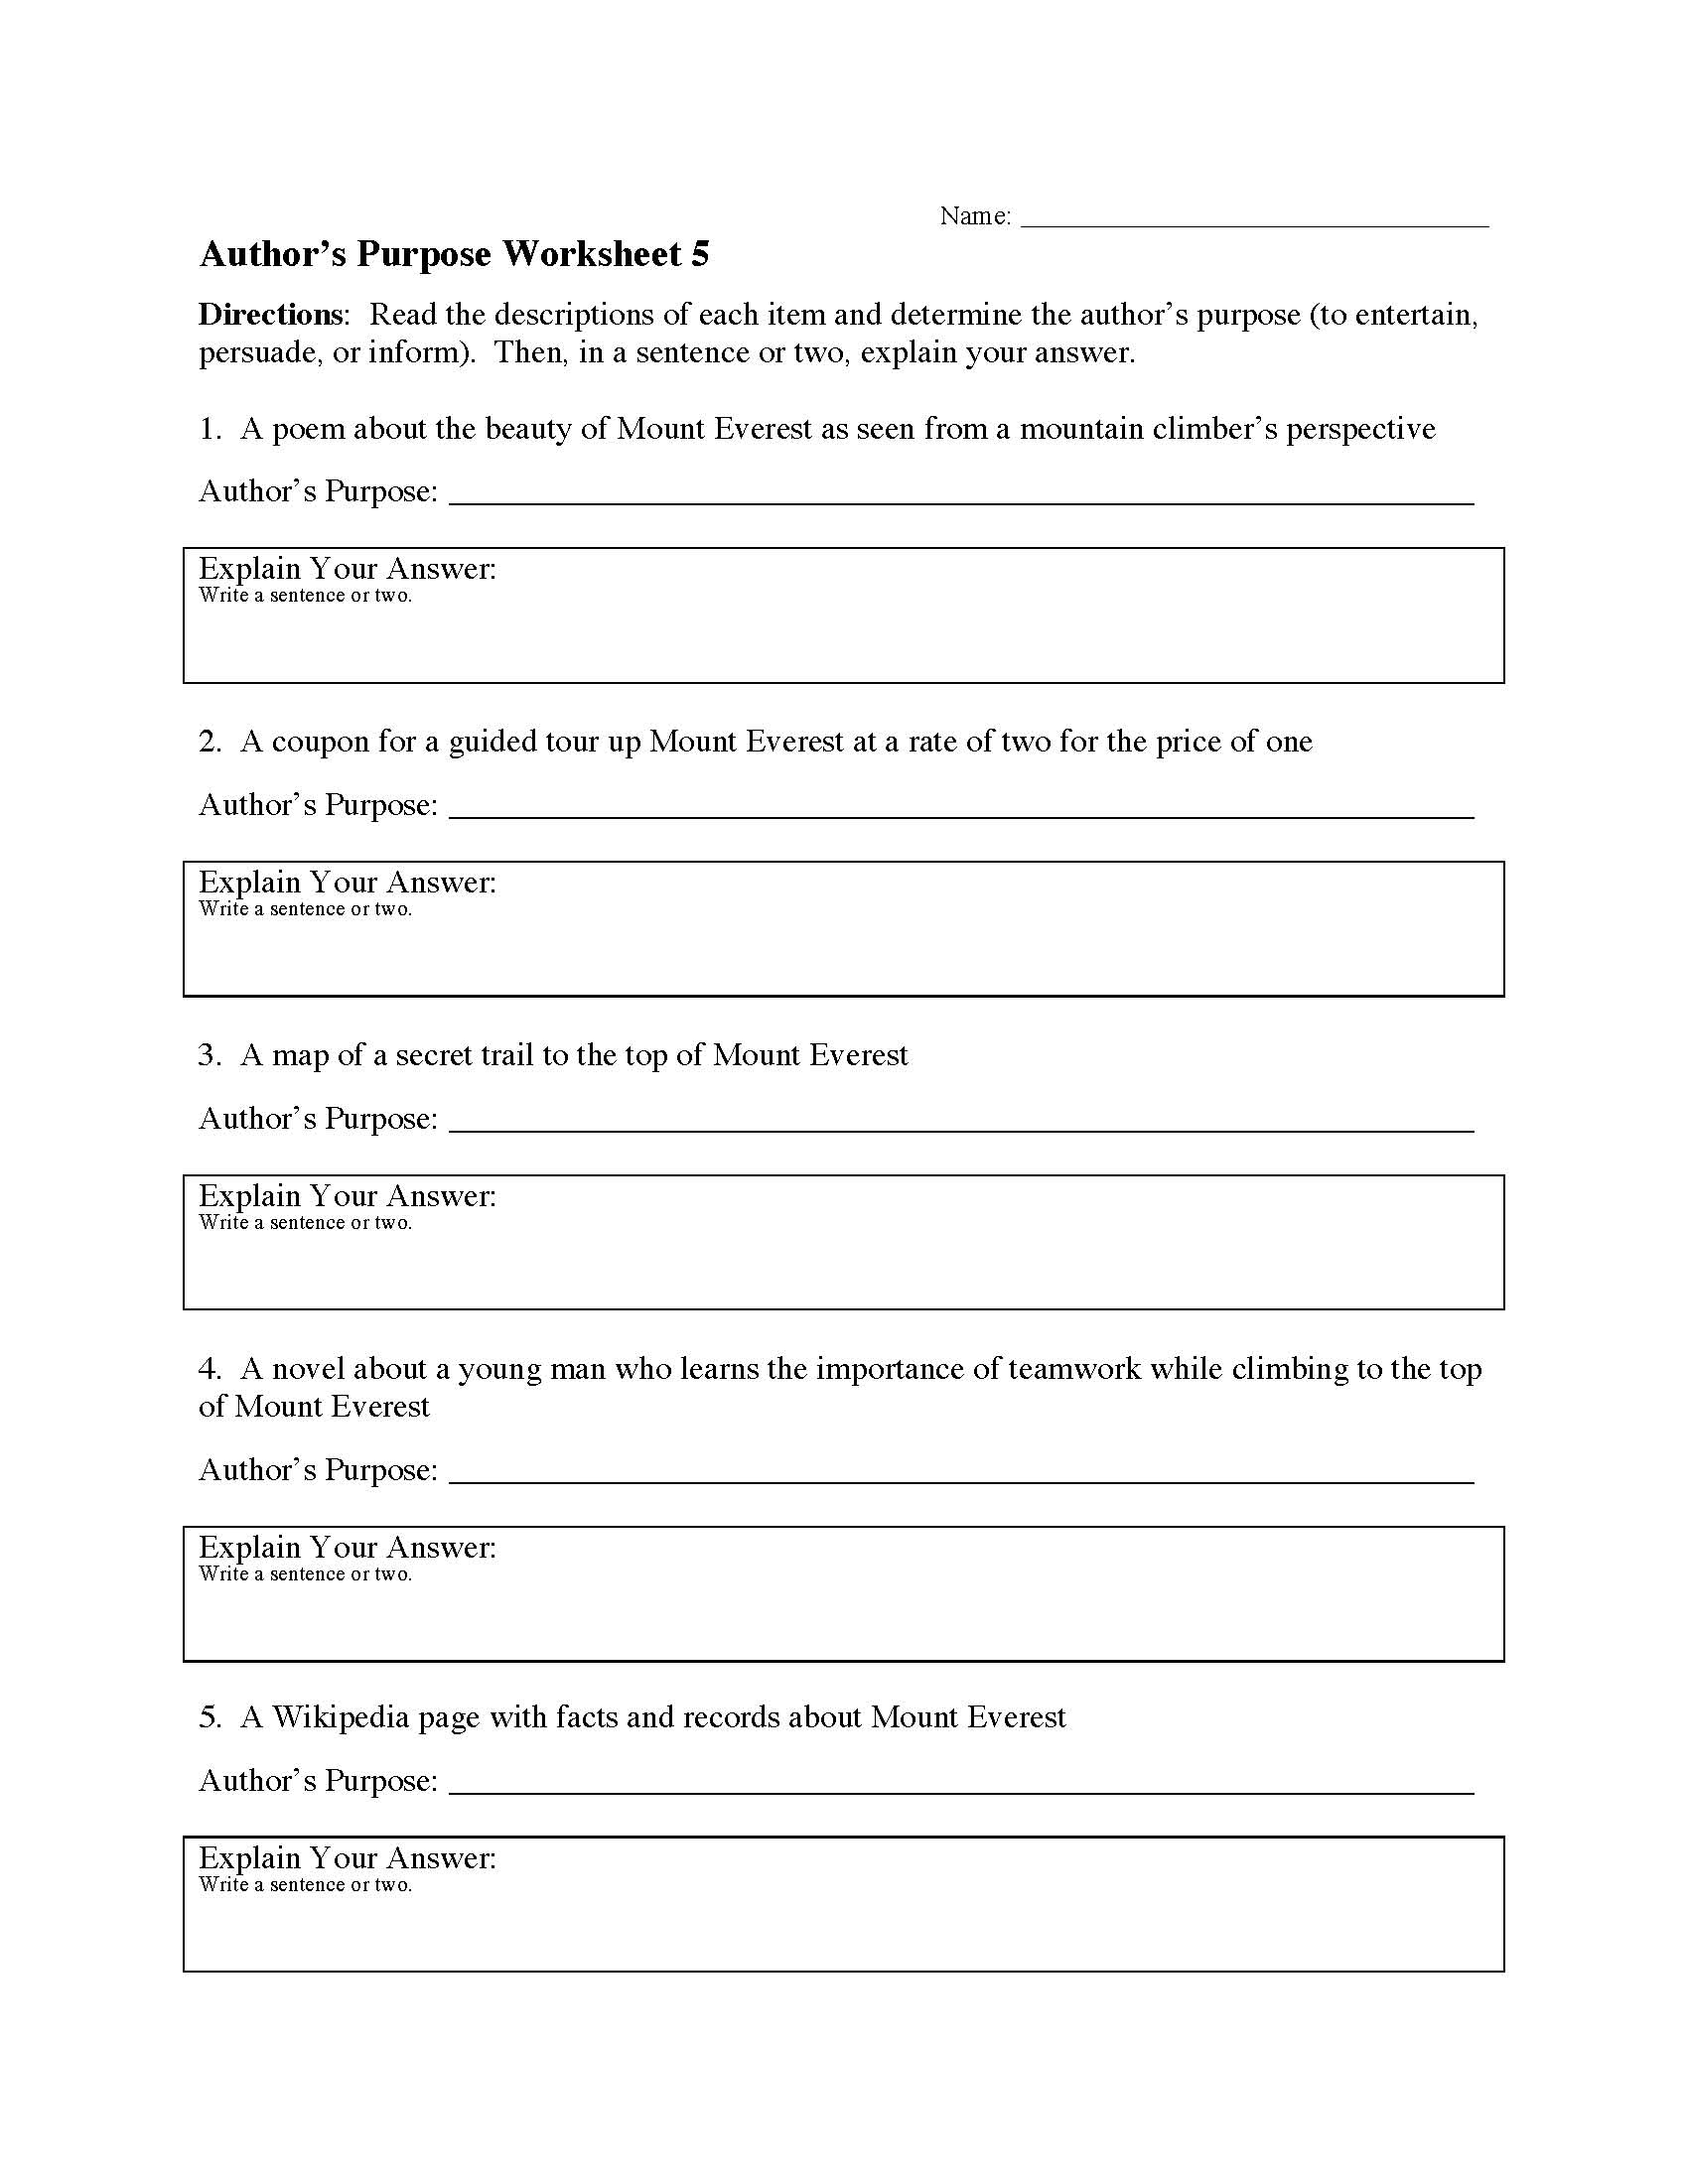 author-s-purpose-worksheet-5-preview